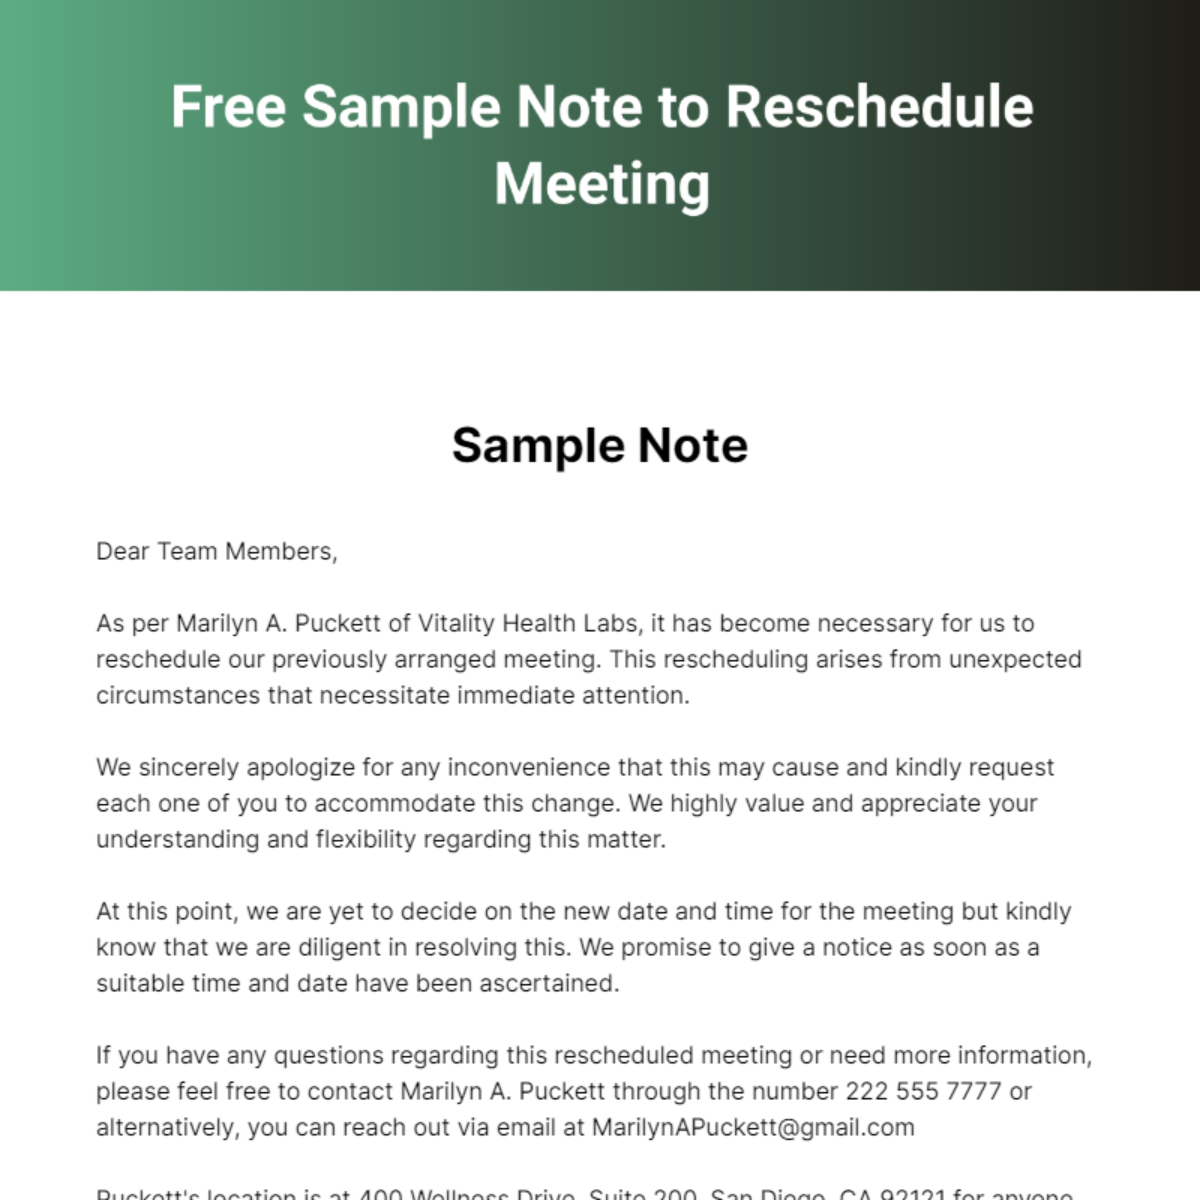 Sample Note to Reschedule Meeting Template